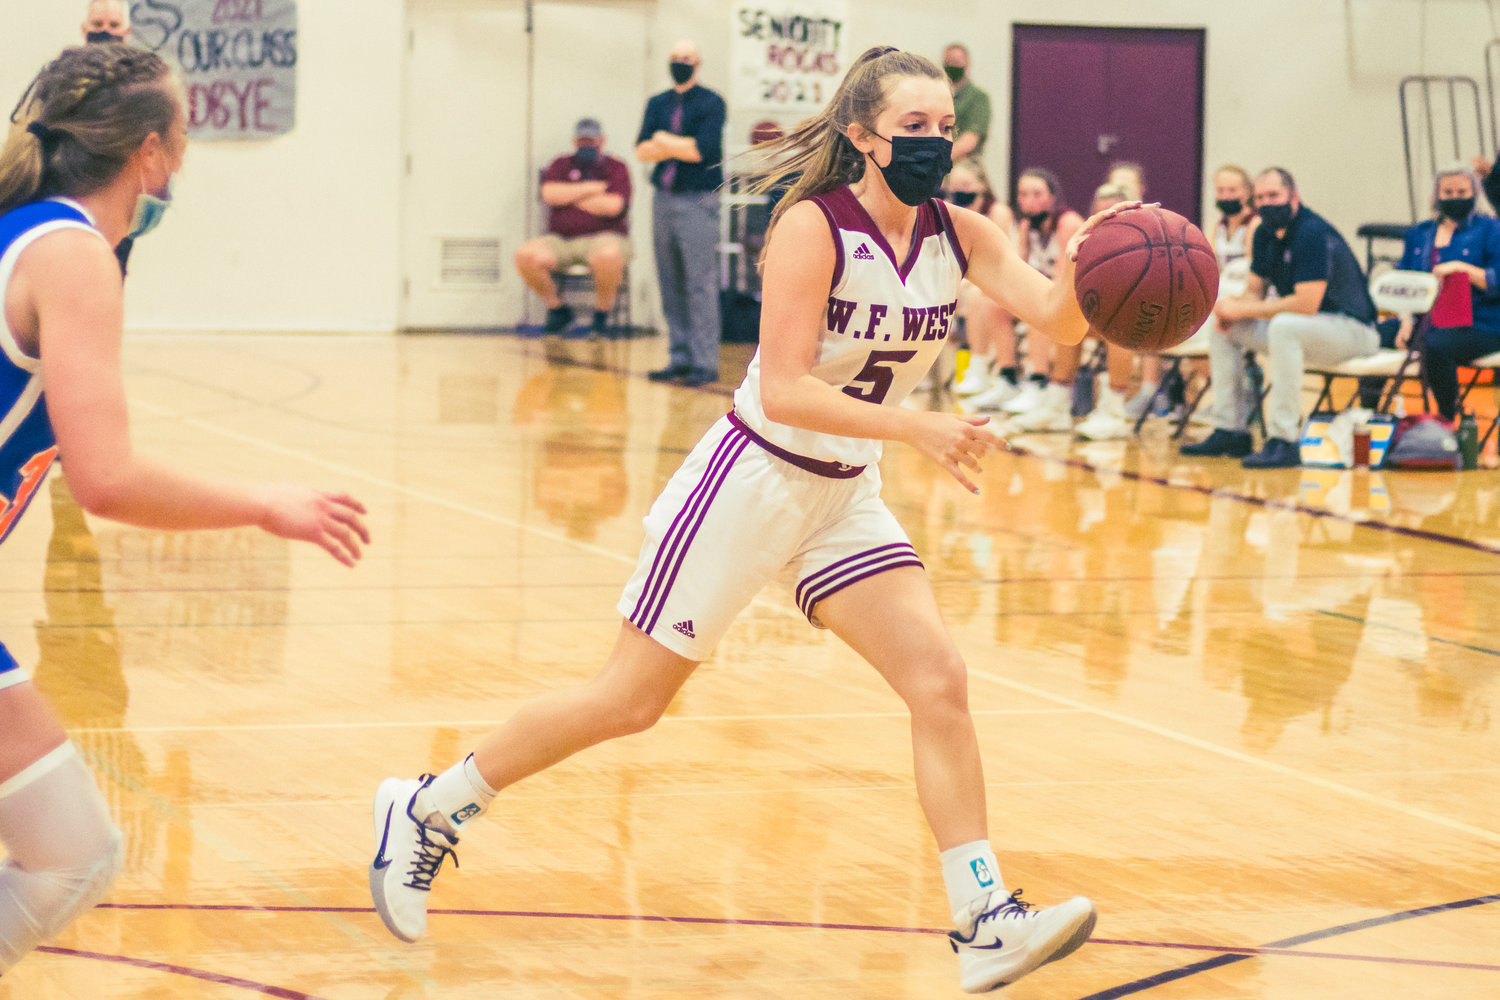 W.F. West's Makayla Mencke (5) dribbles down the court during a game against Ridgefield in Chehalis Wednesday night.